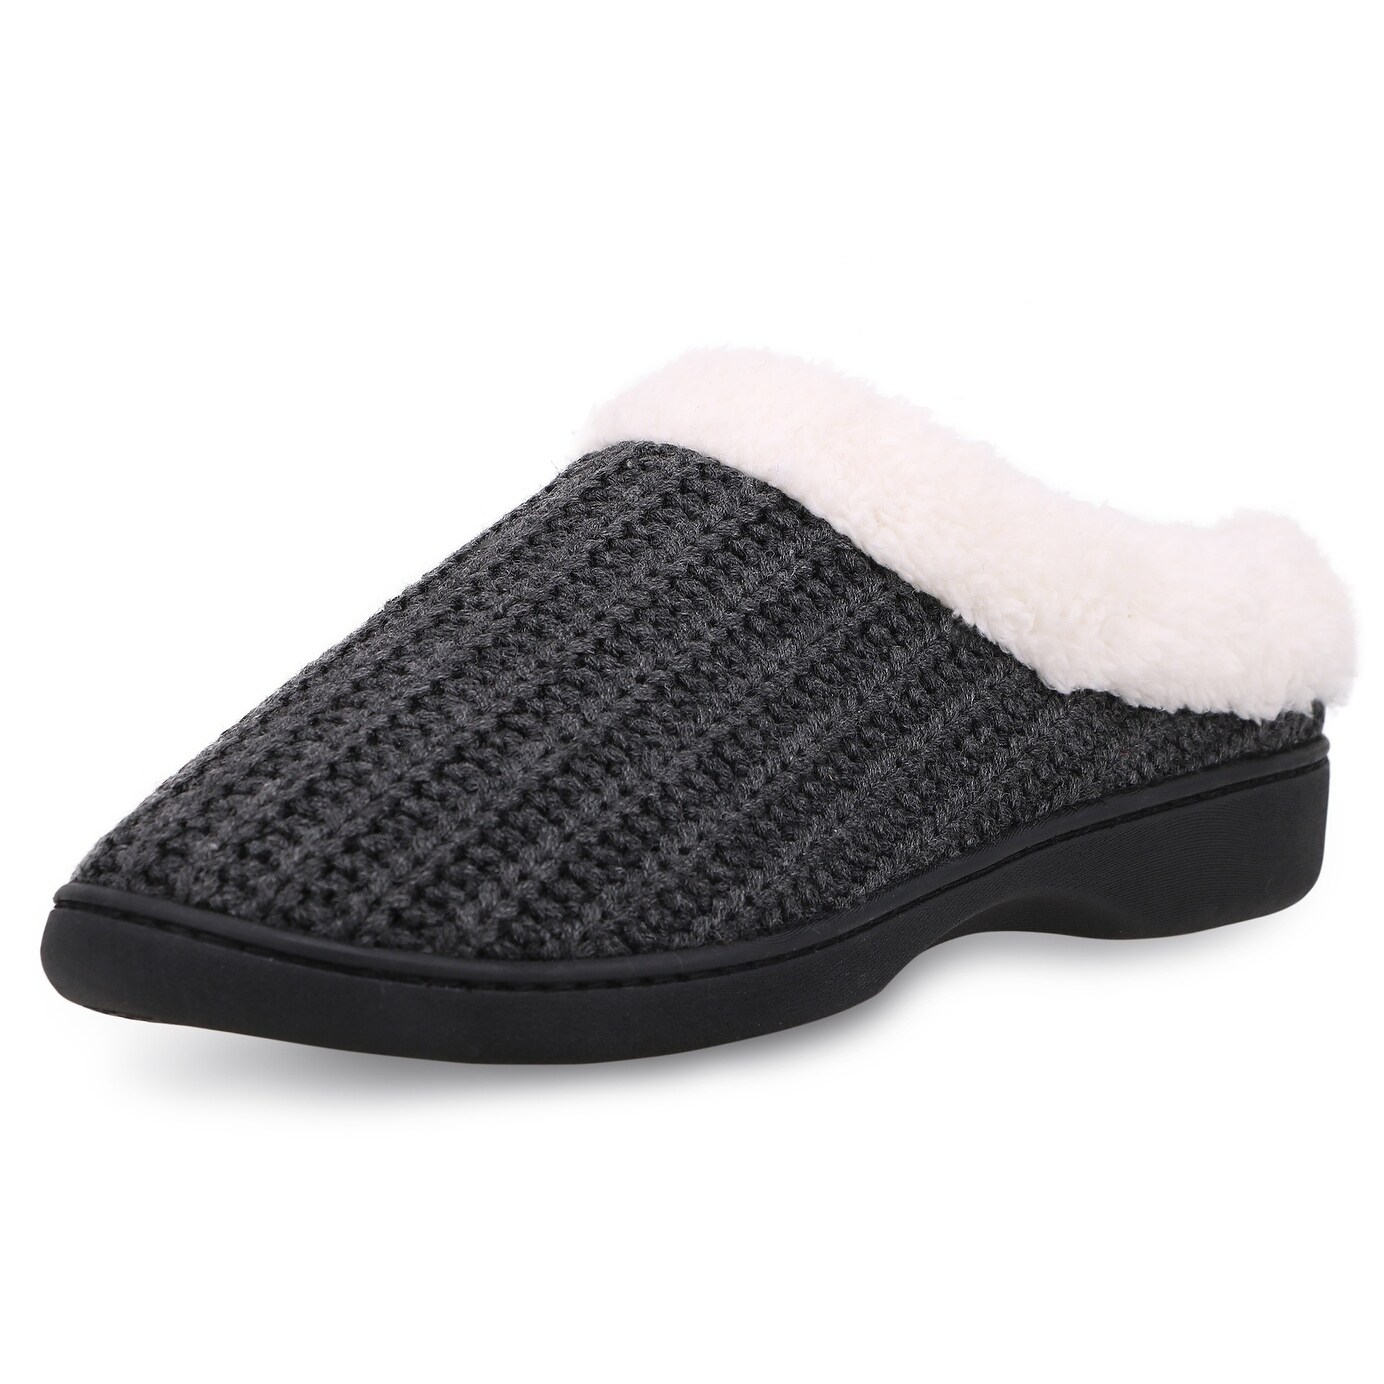 rubber soled slippers womens